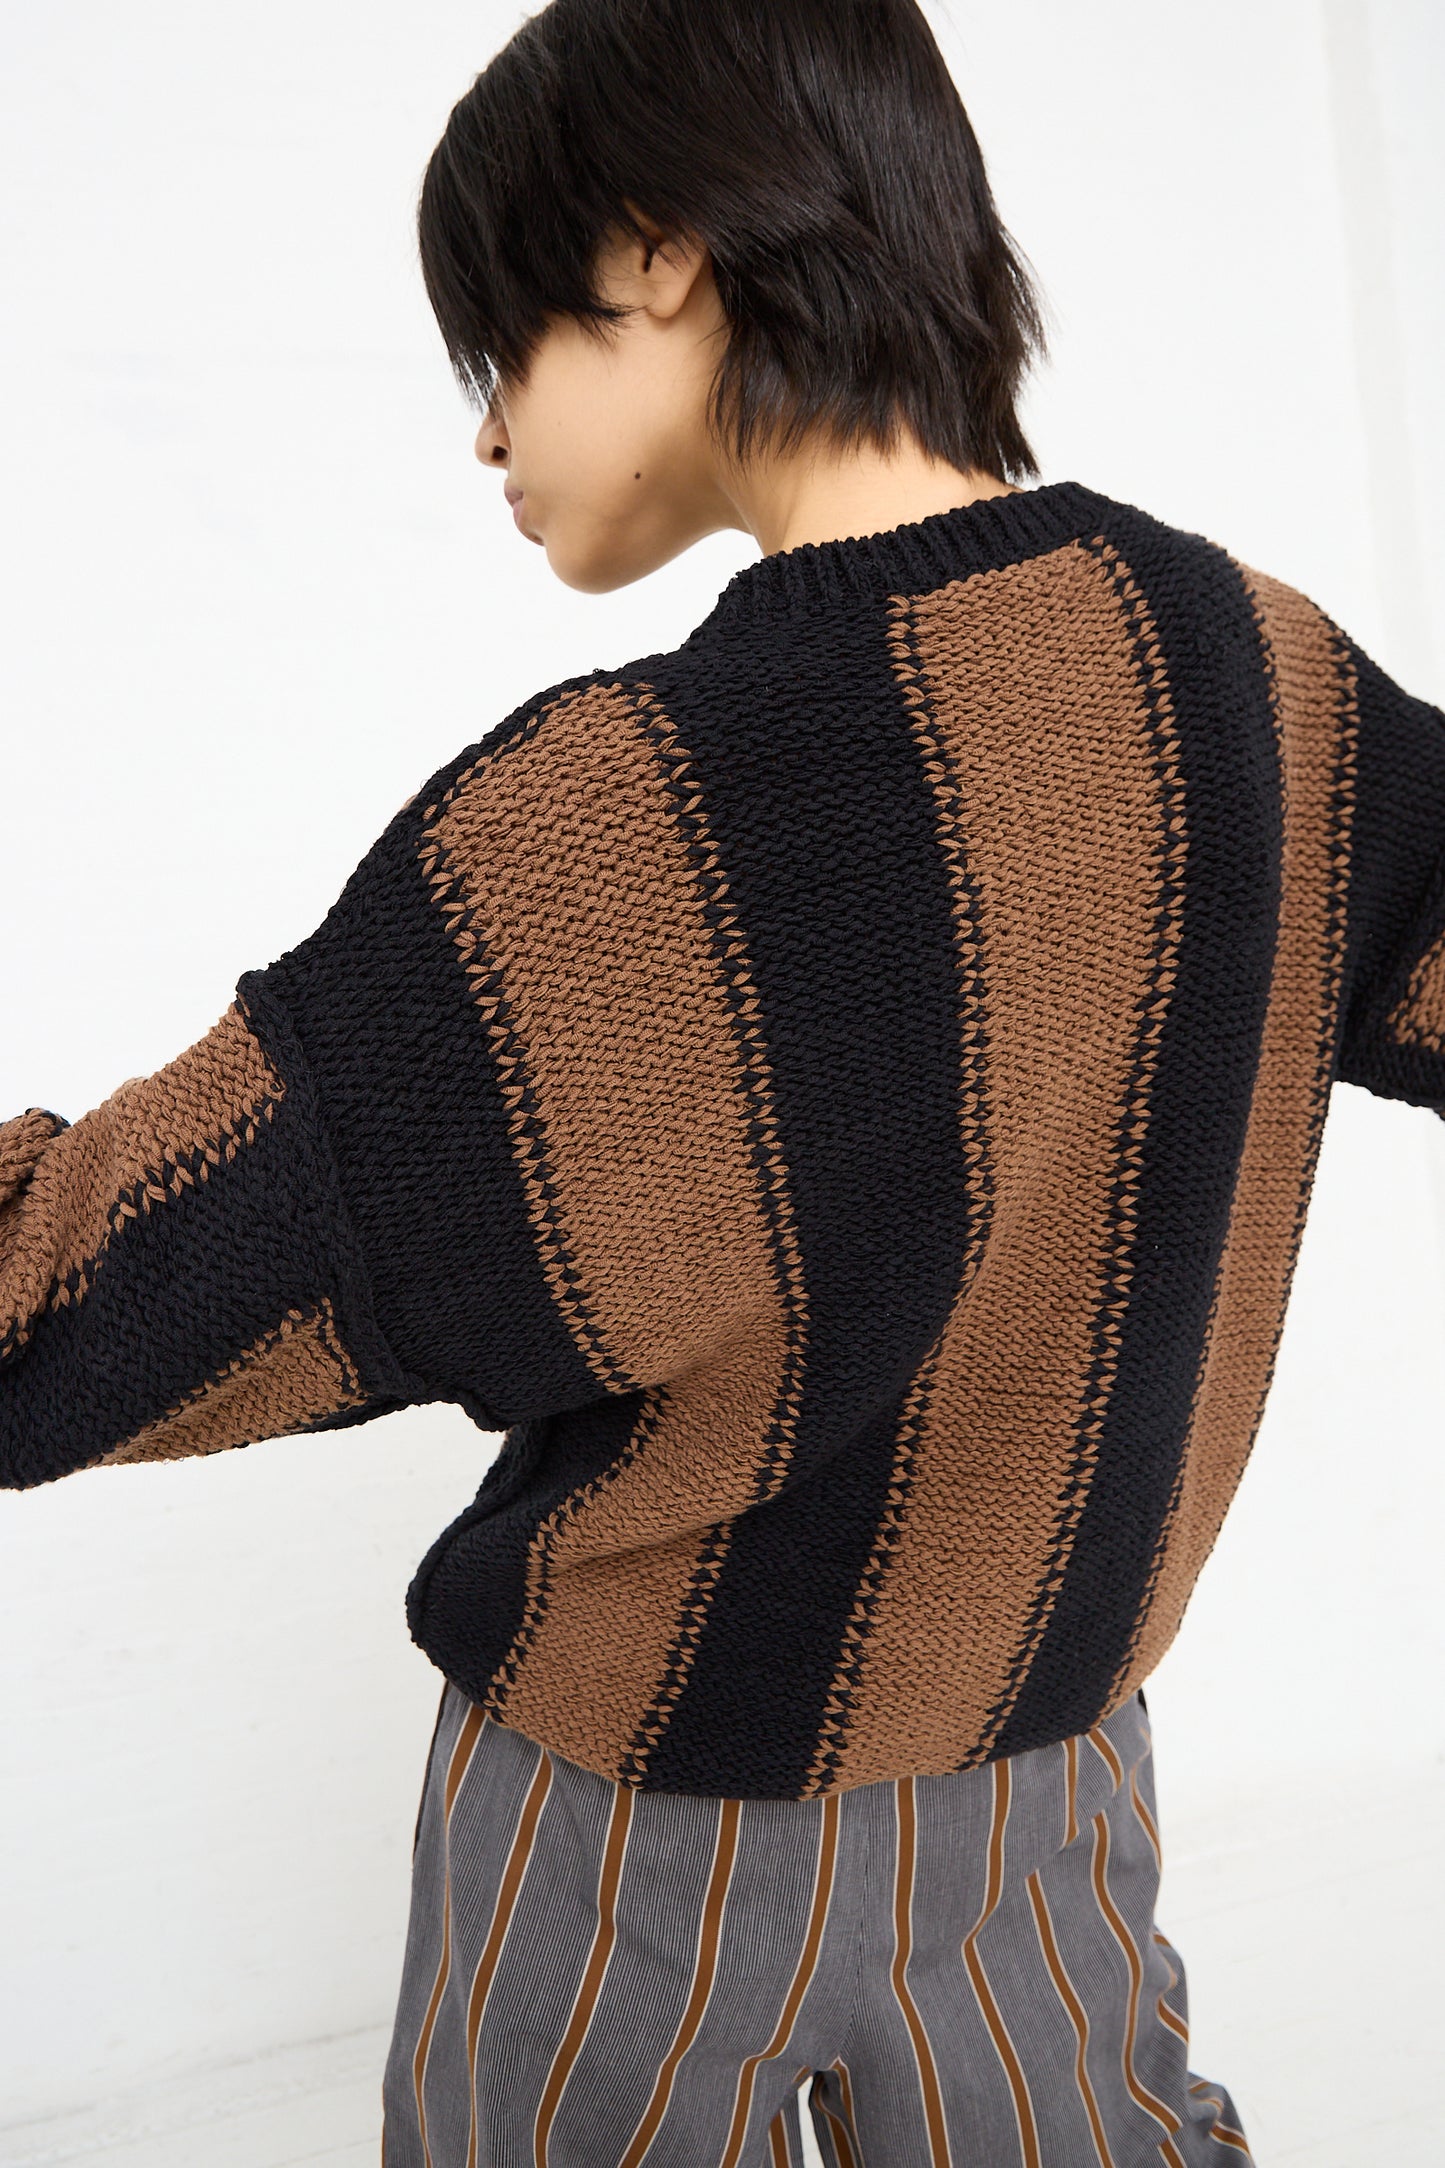 The back of a woman wearing a Cristaseya Fettuccia Striped Sweater in Black and Noisette (Brown) with dropped shoulders.